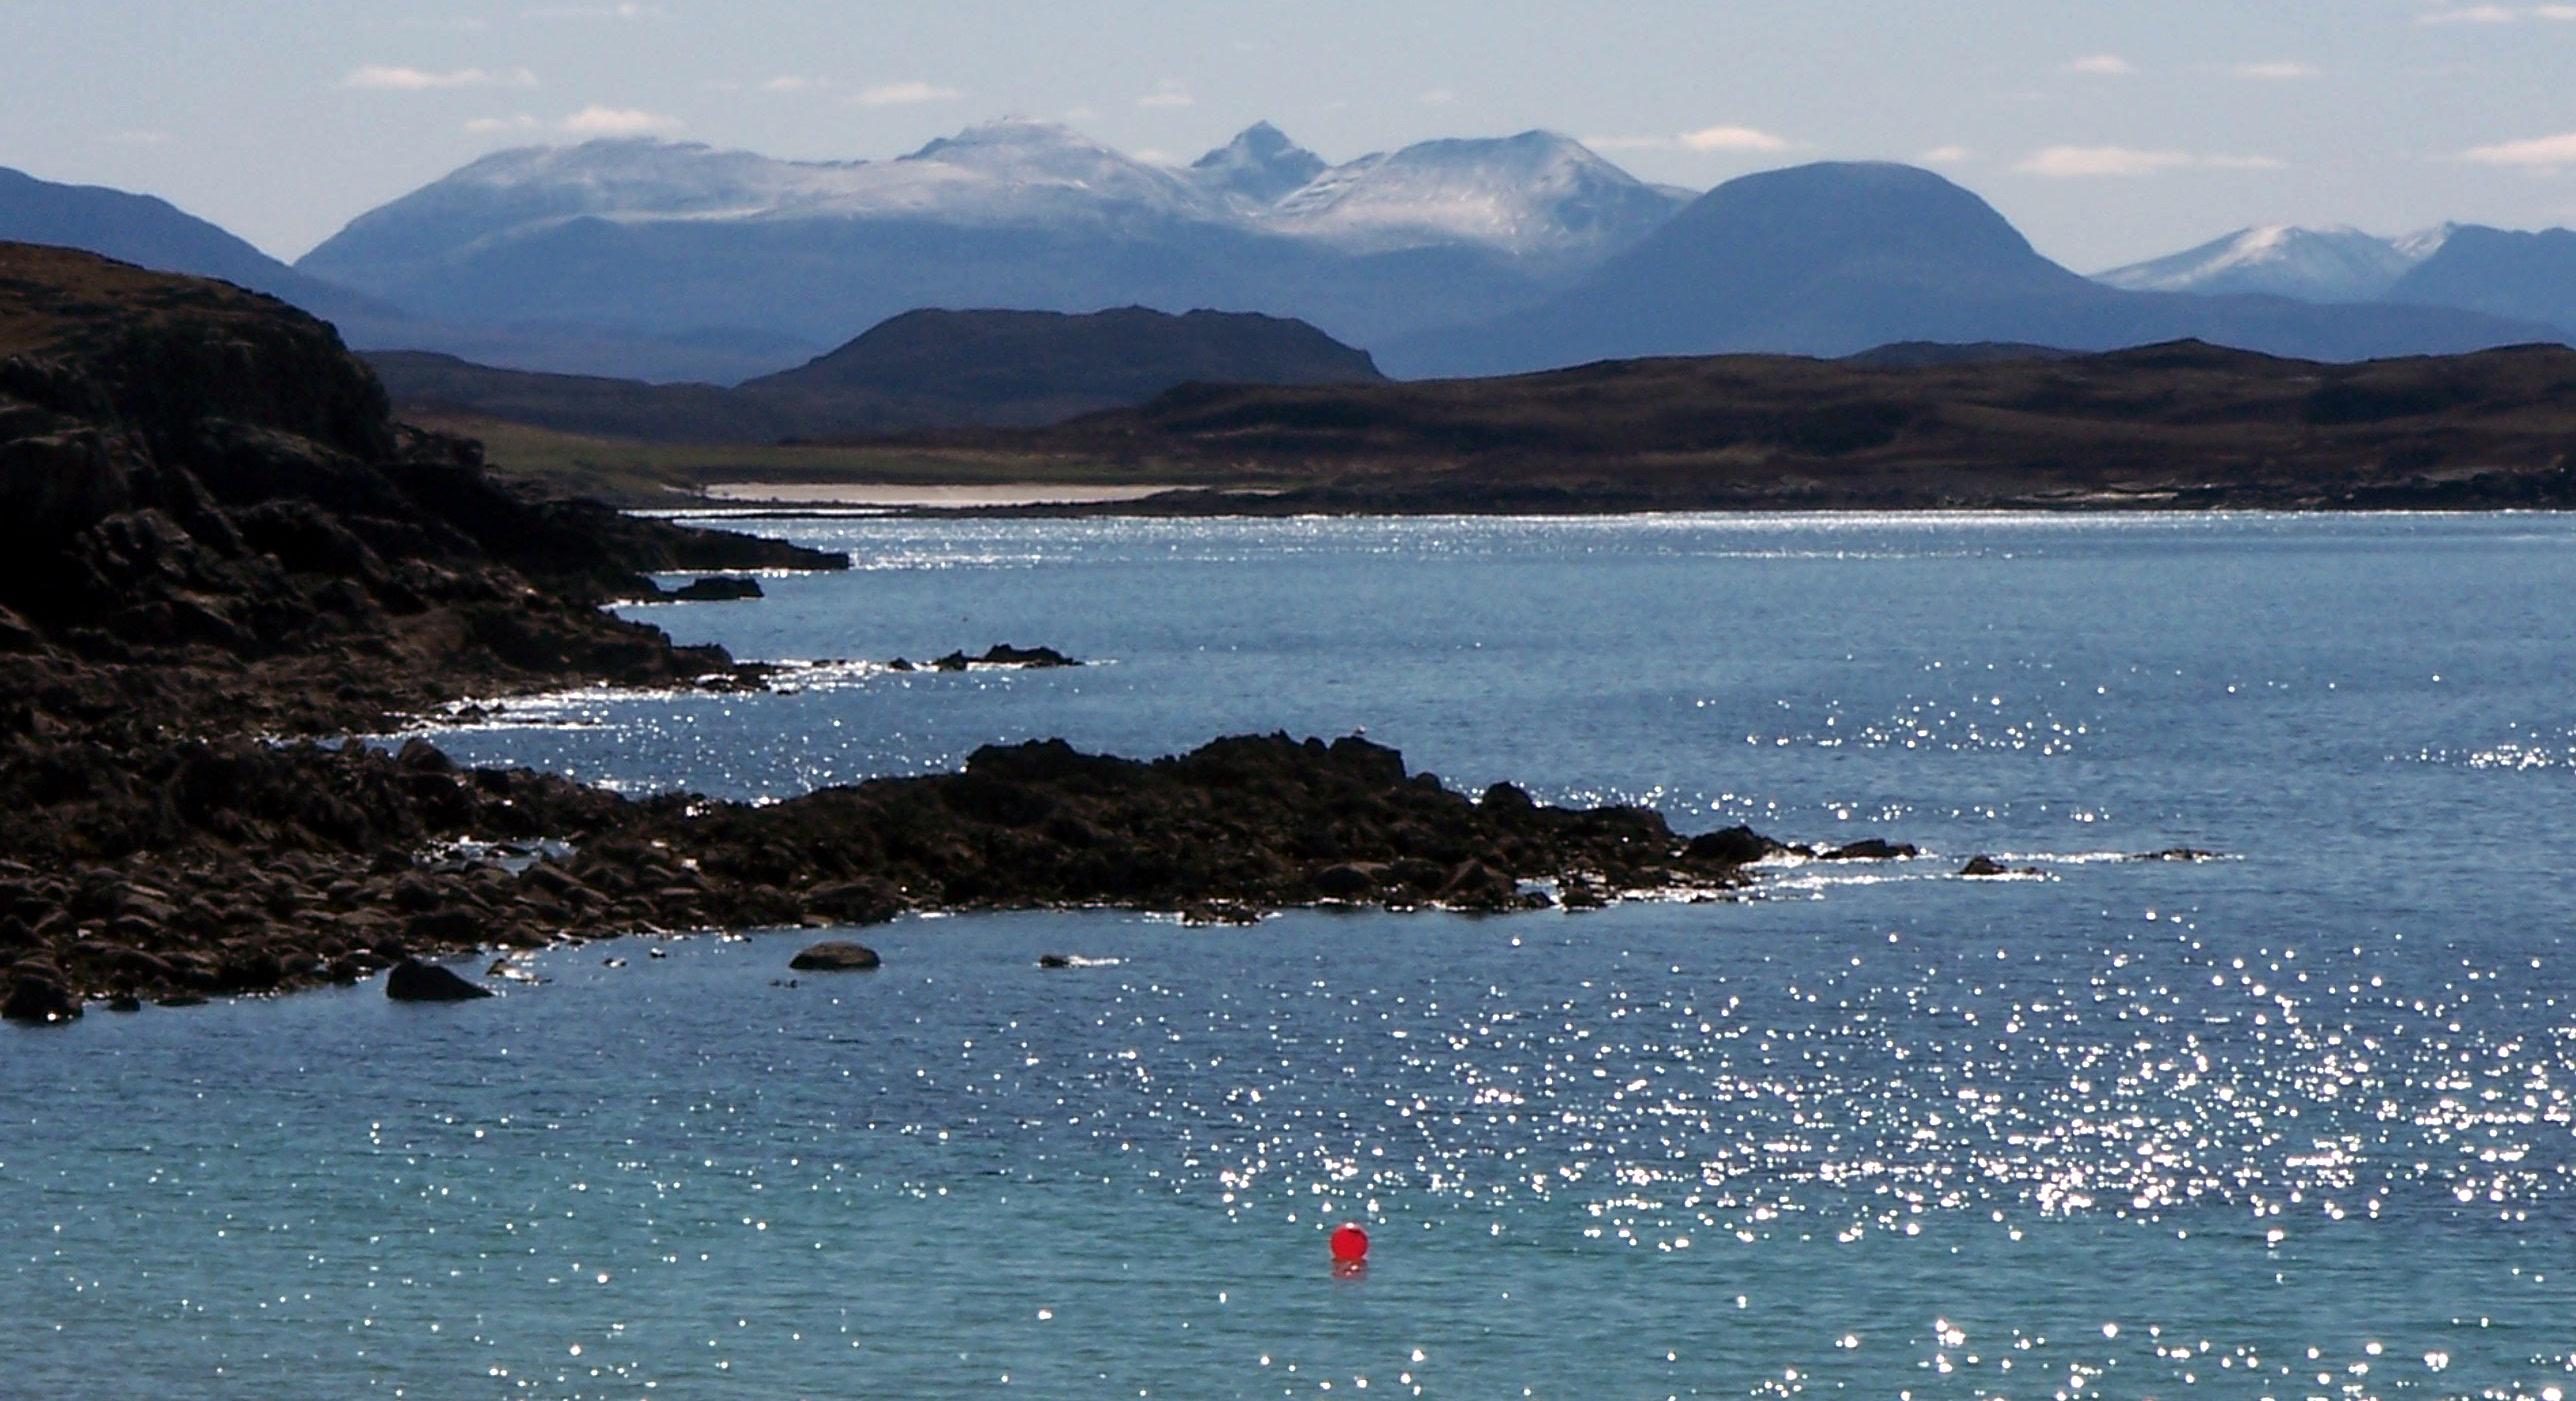 View across the Bay of Sail Mhor